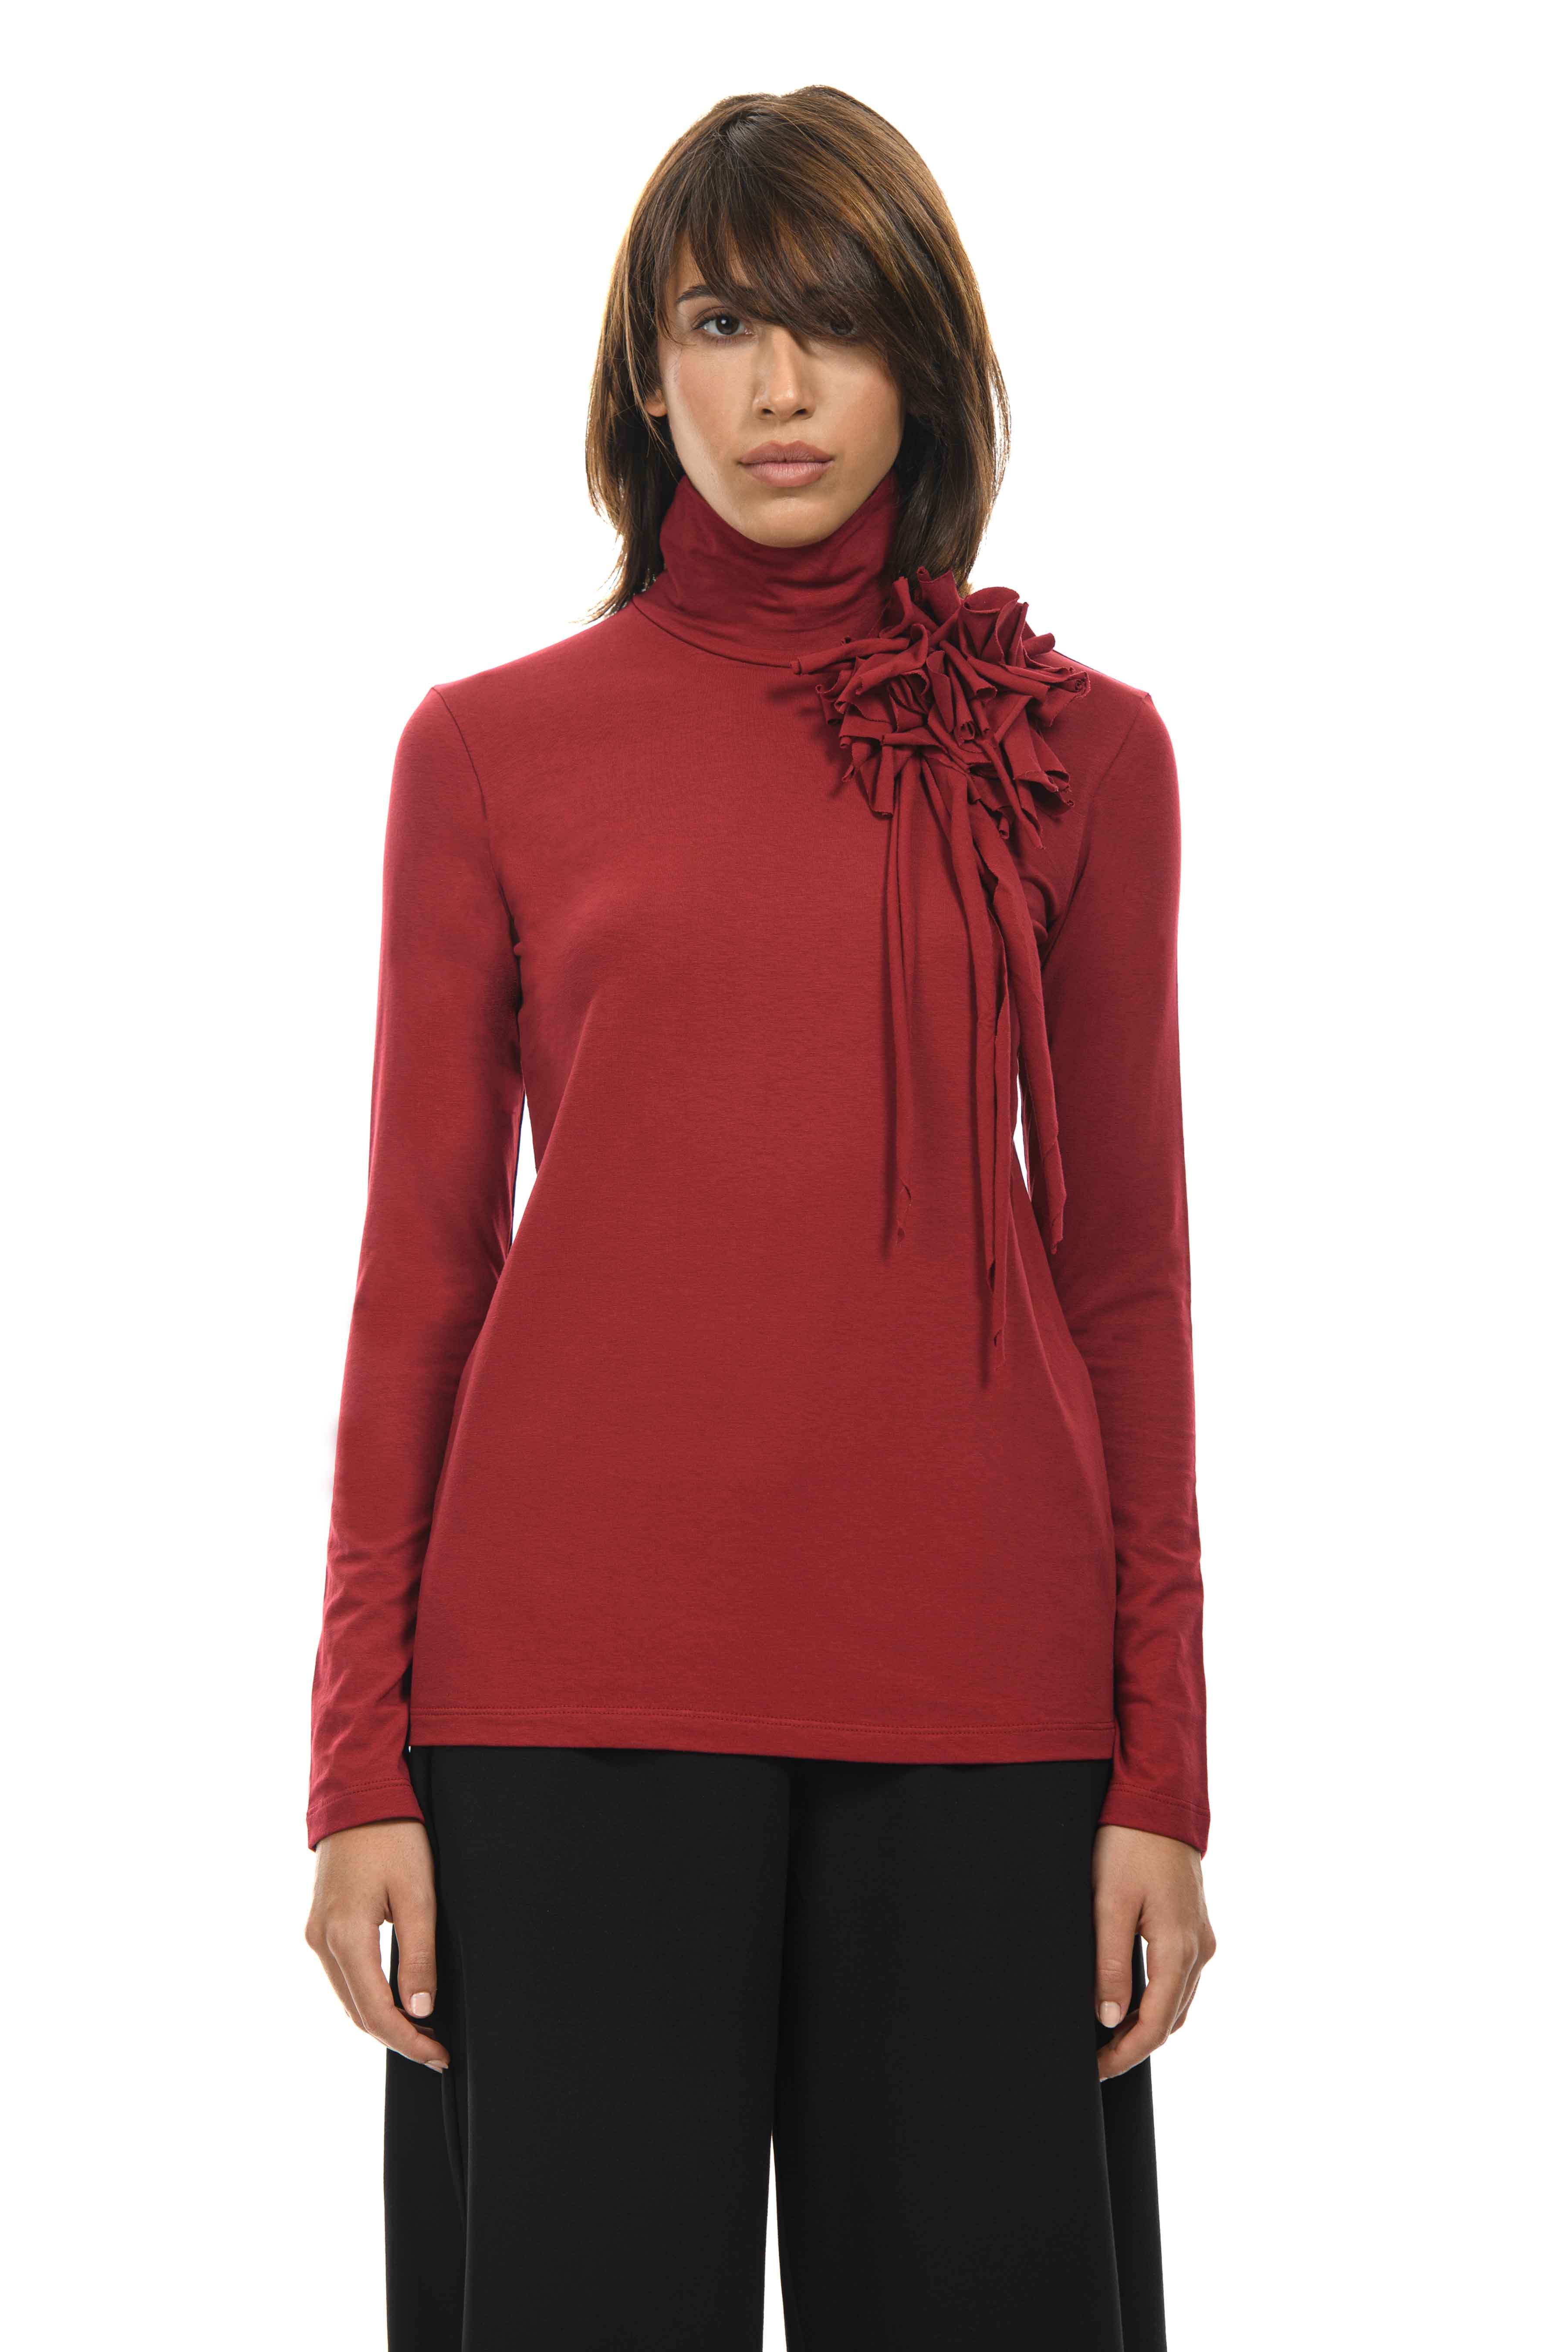 MAGO' Turtleneck with maxi flower